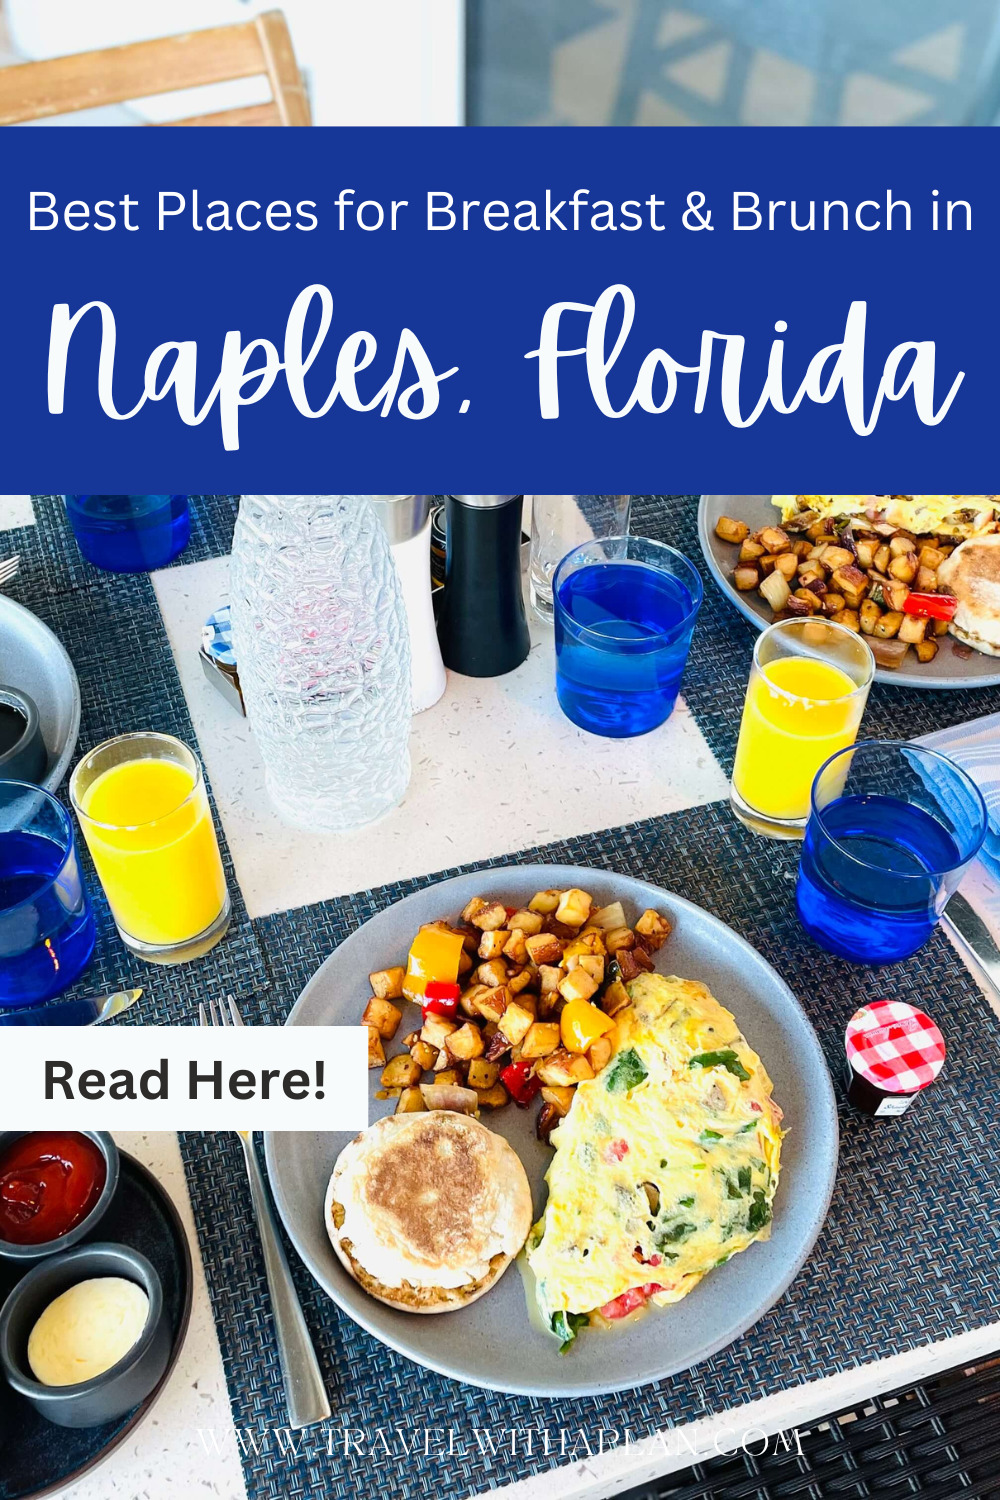 Discover the best places for breakfast and brunch in Naples, Florida to enjoy during your Florida getaway!  Rise & shine, it's vacation time!  #familiytravel #Floridavacations #naples